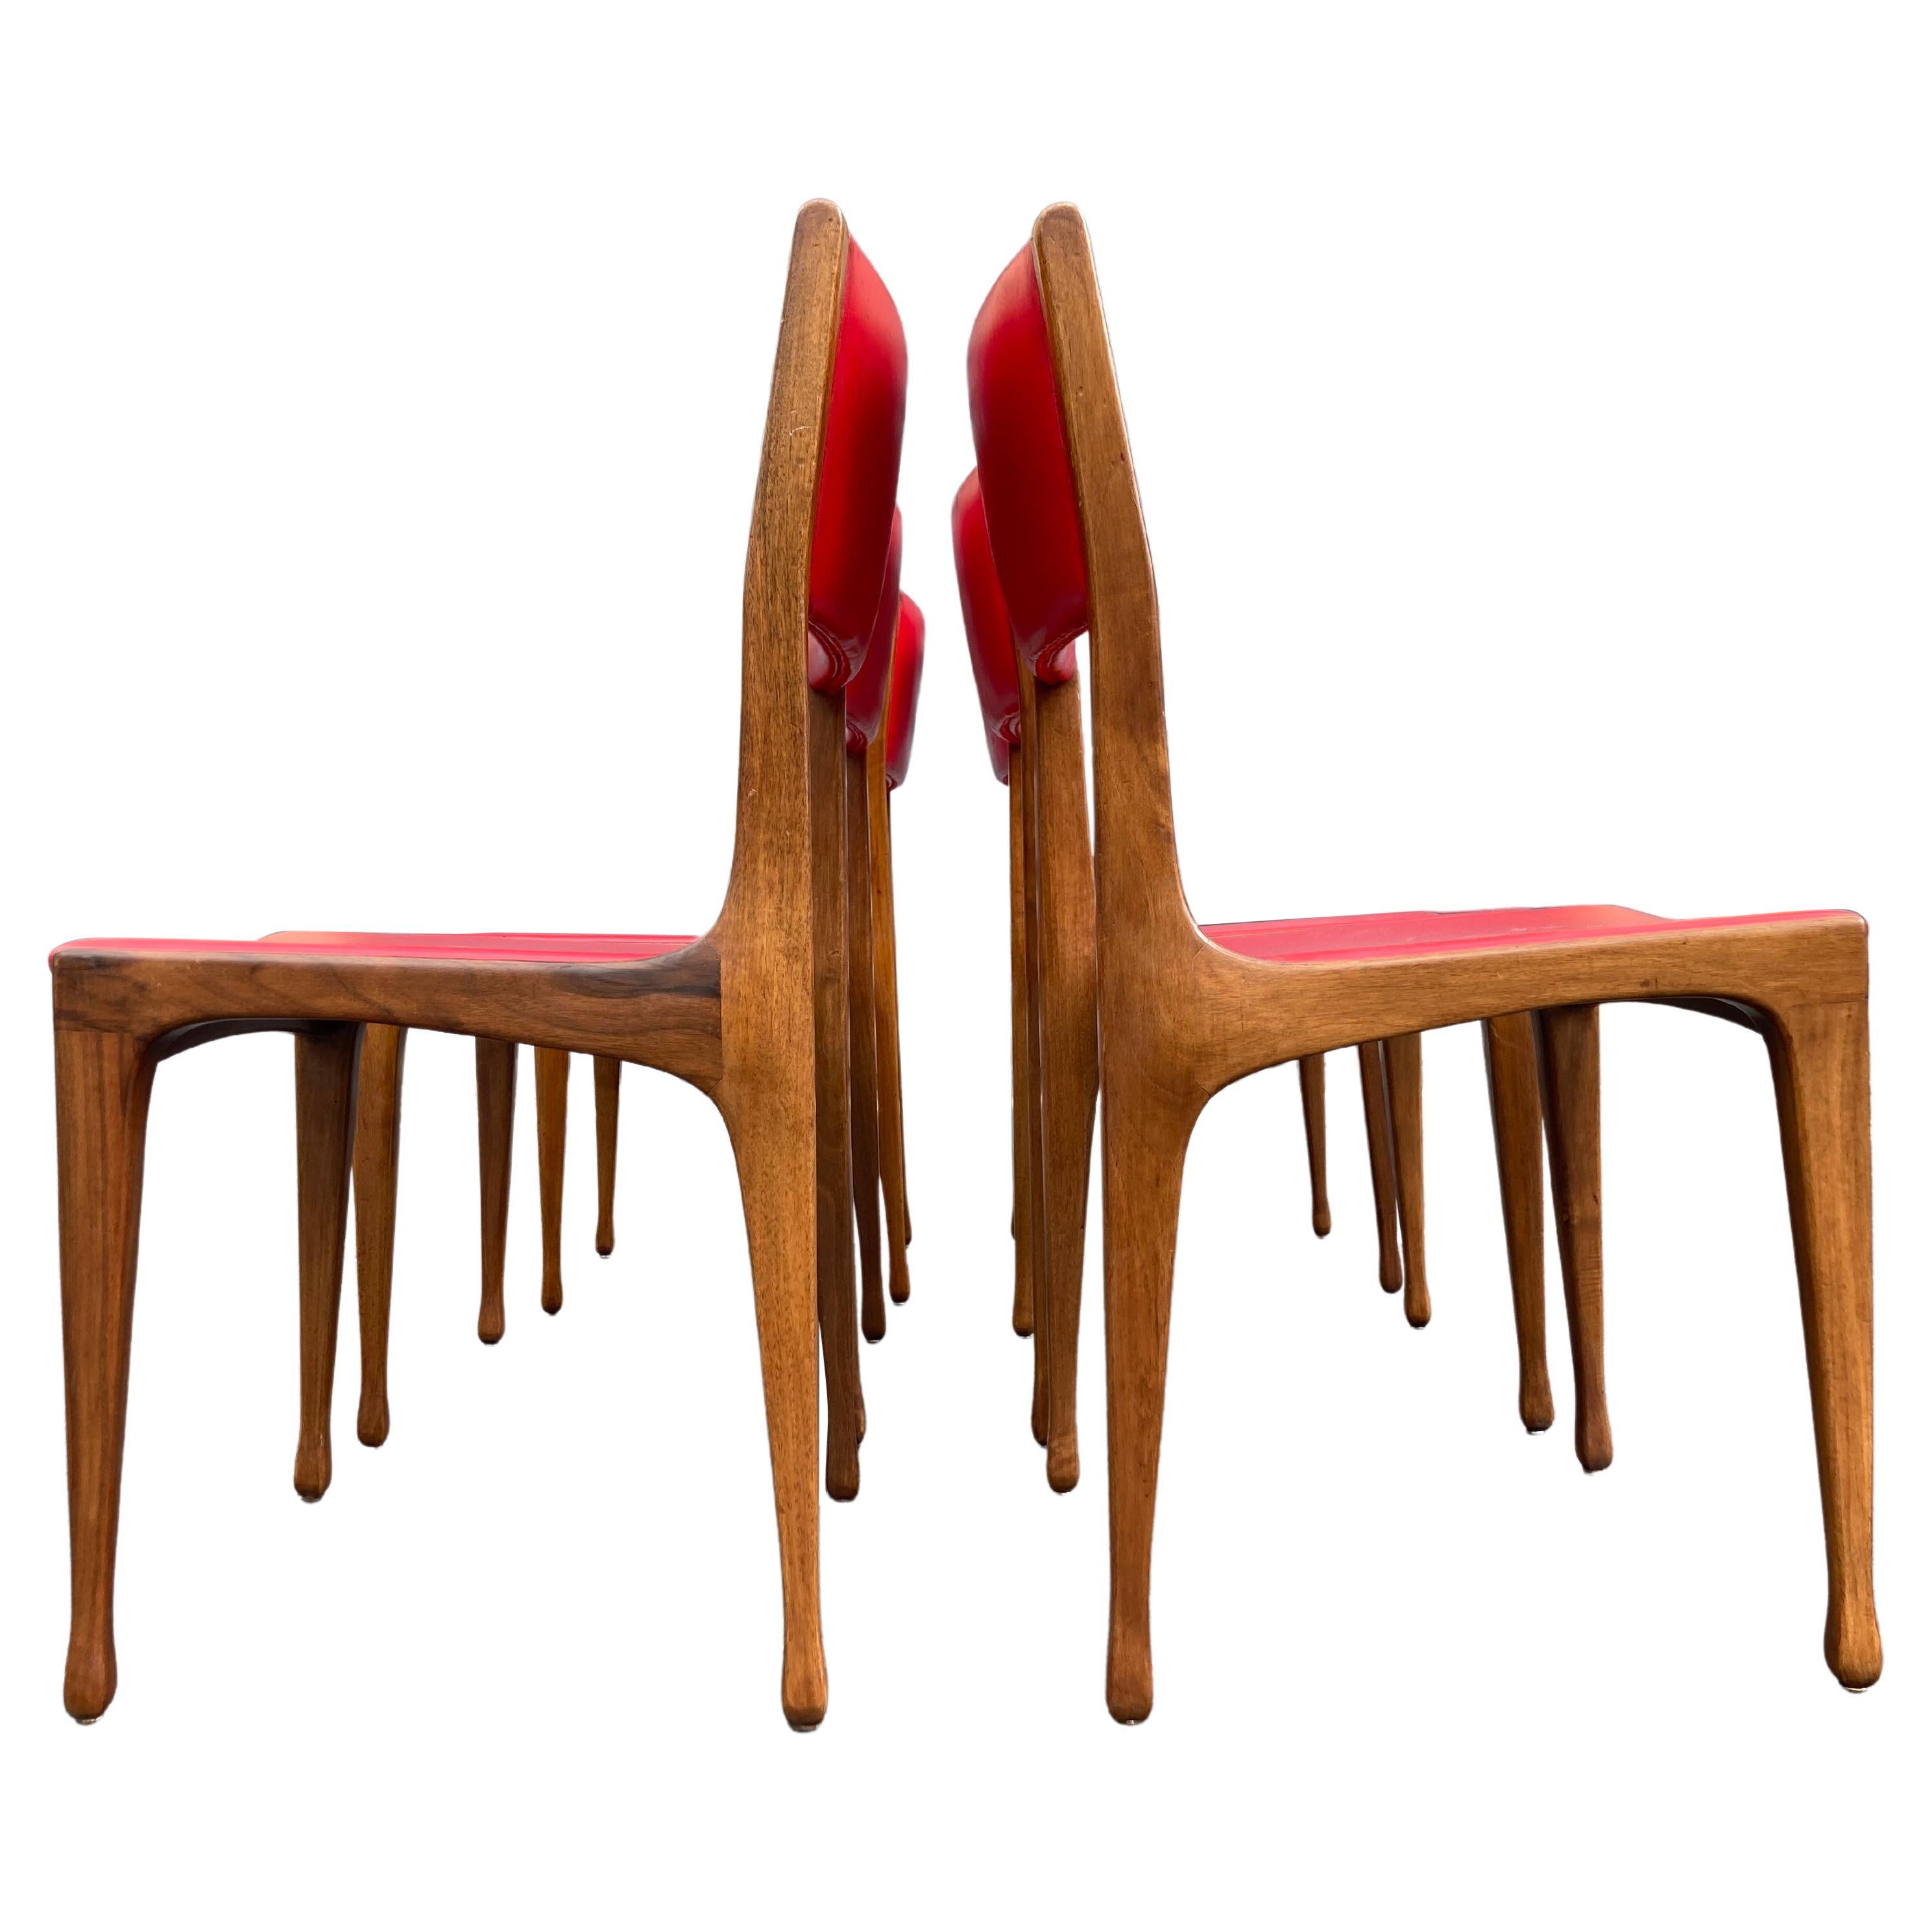 Set of 6 Chairs Designed by Carlo de Carli for Cassina, Walnut, Red Vinyl